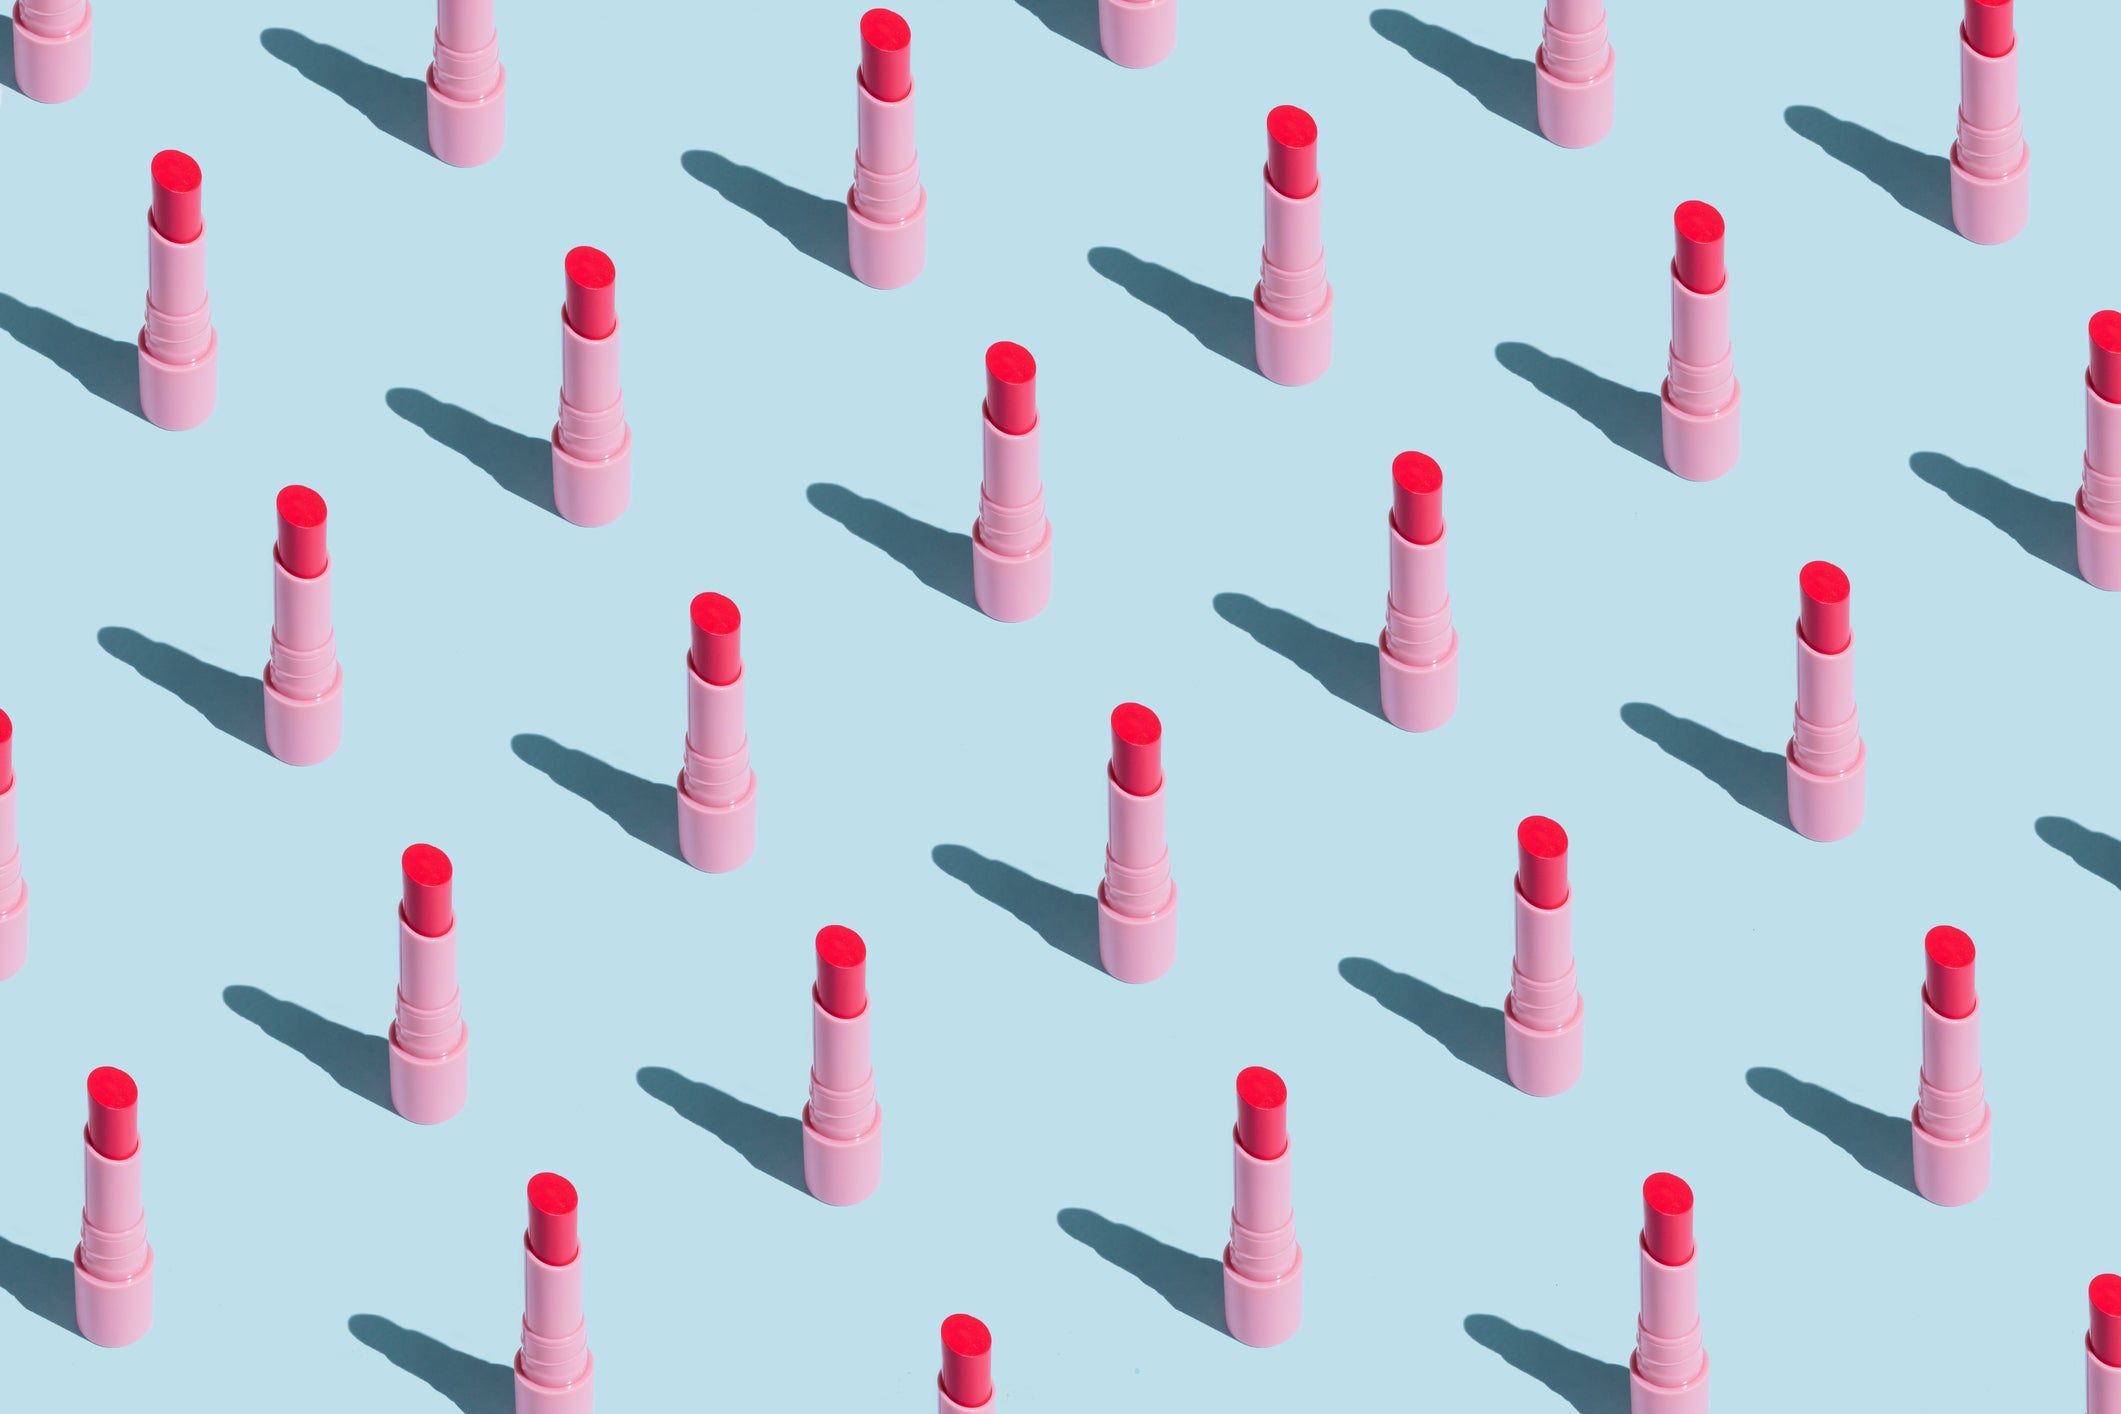 The Deals You Don't Want To Miss For National Lipstick Day 2023